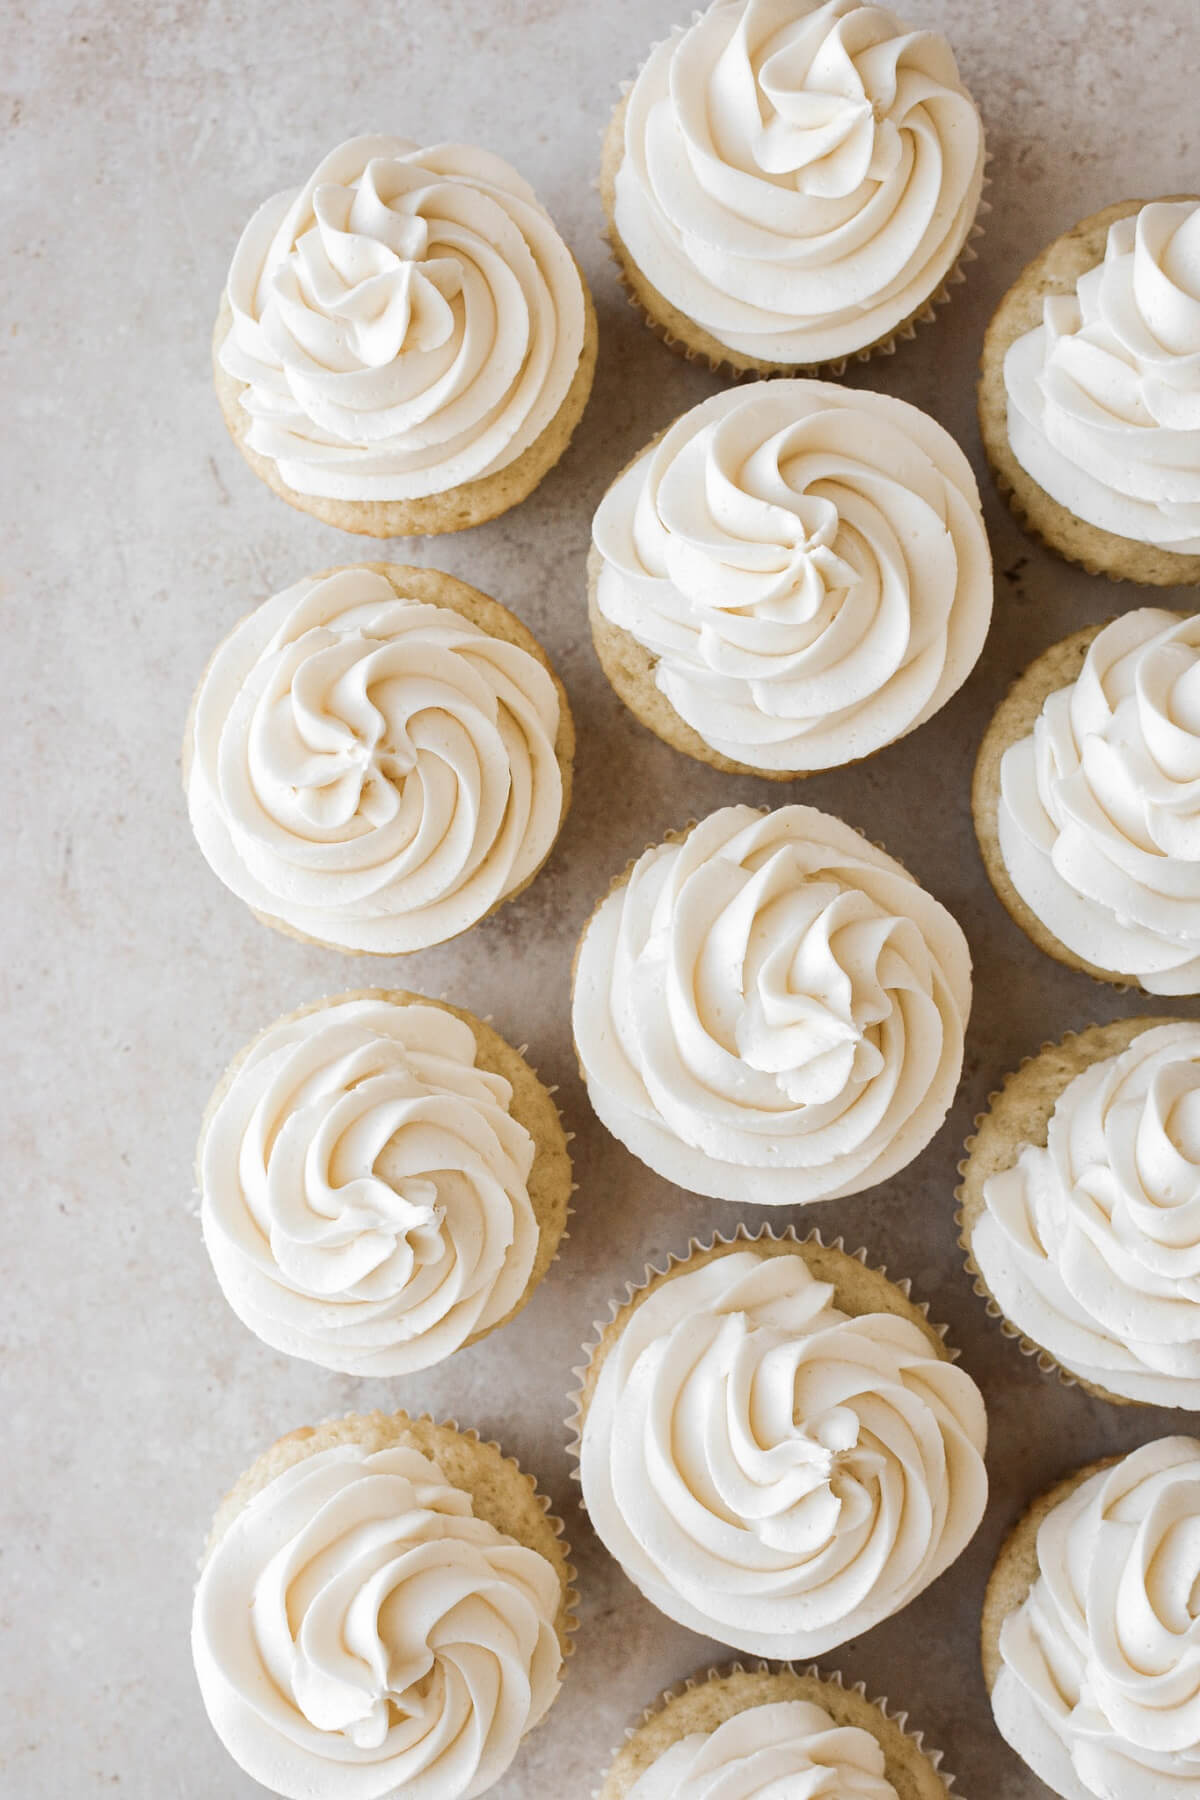 Coconut buttercream piped onto coconut cupcakes.